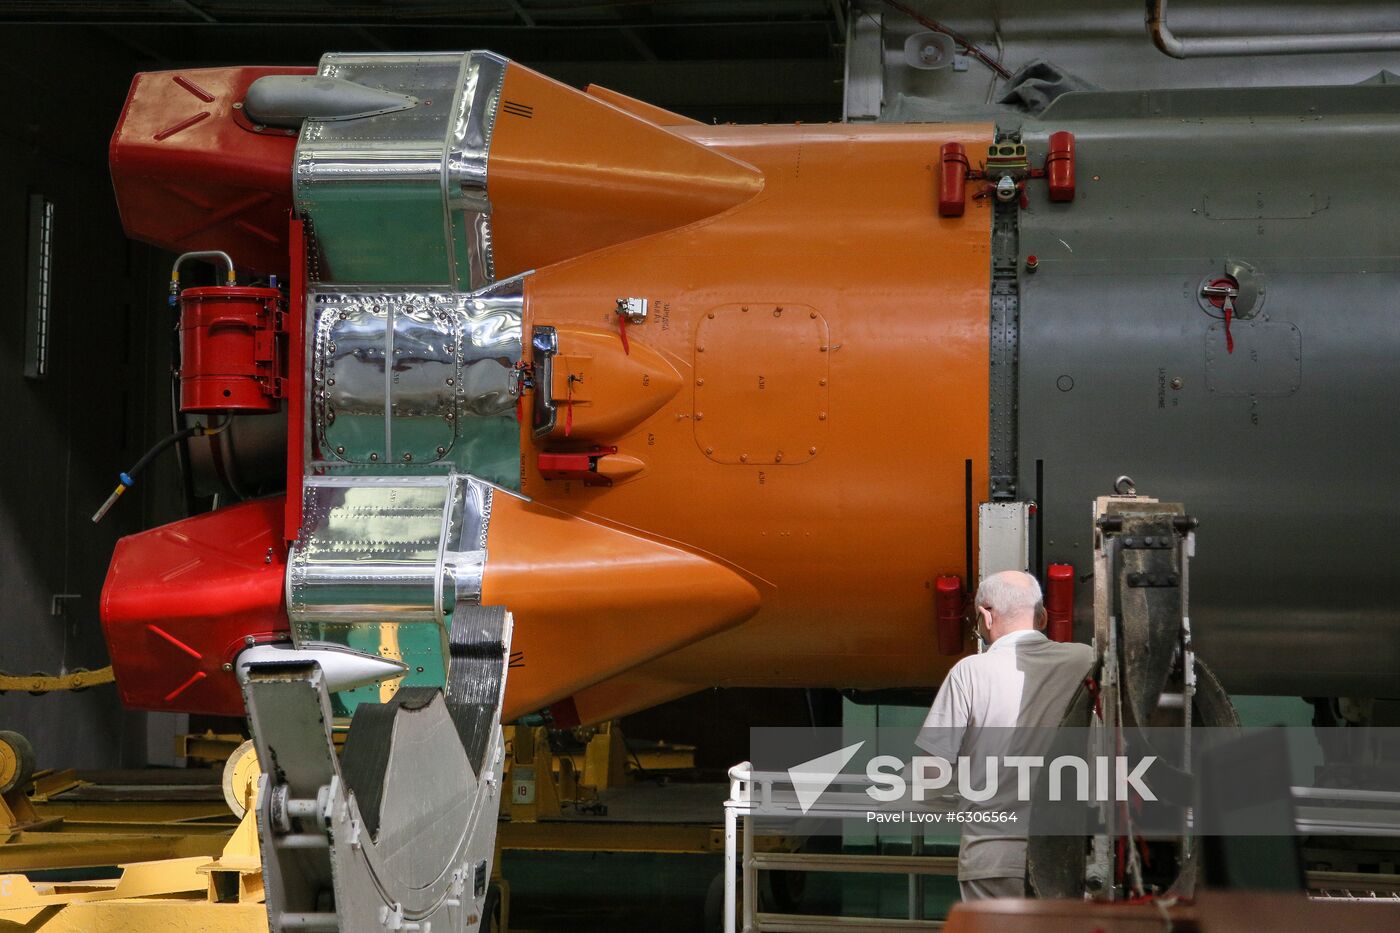 Russia Space Launch Vehicles Assembly